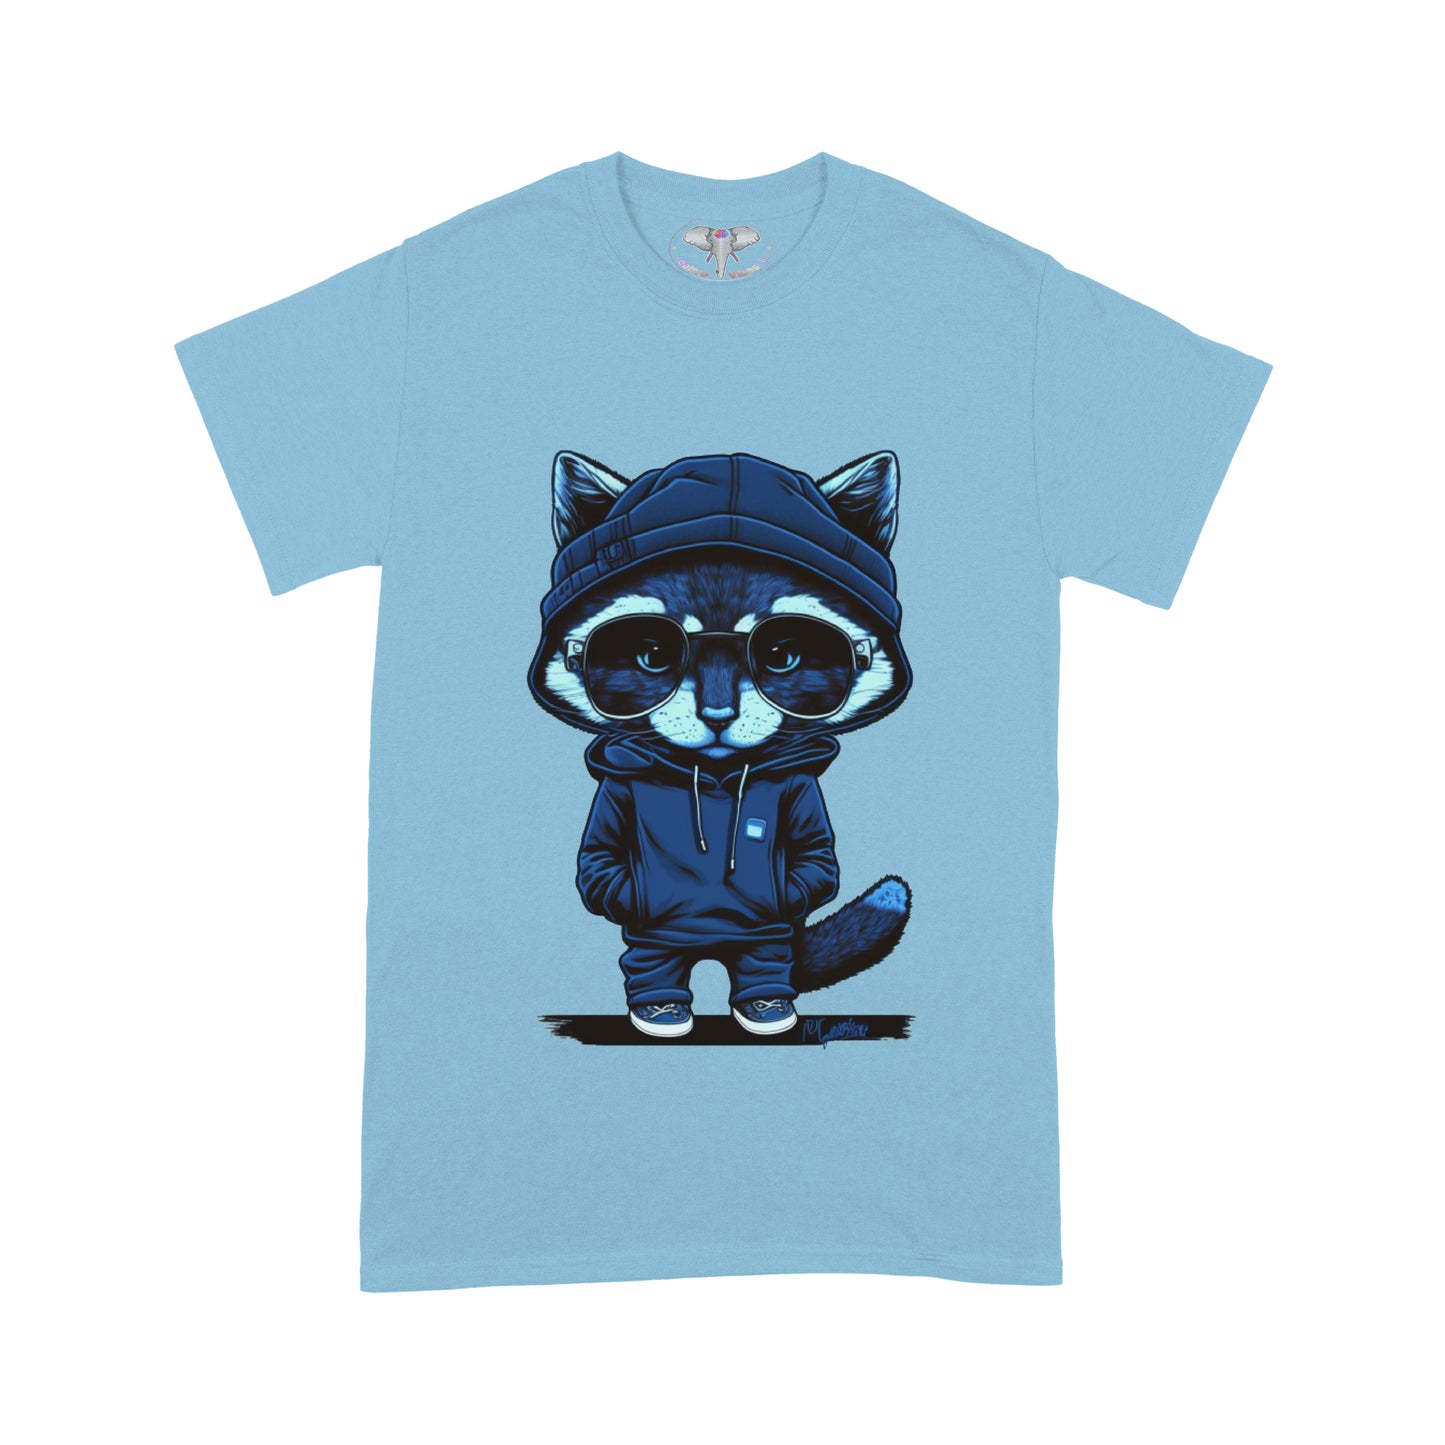 Cool Cat Graphic T-shirt